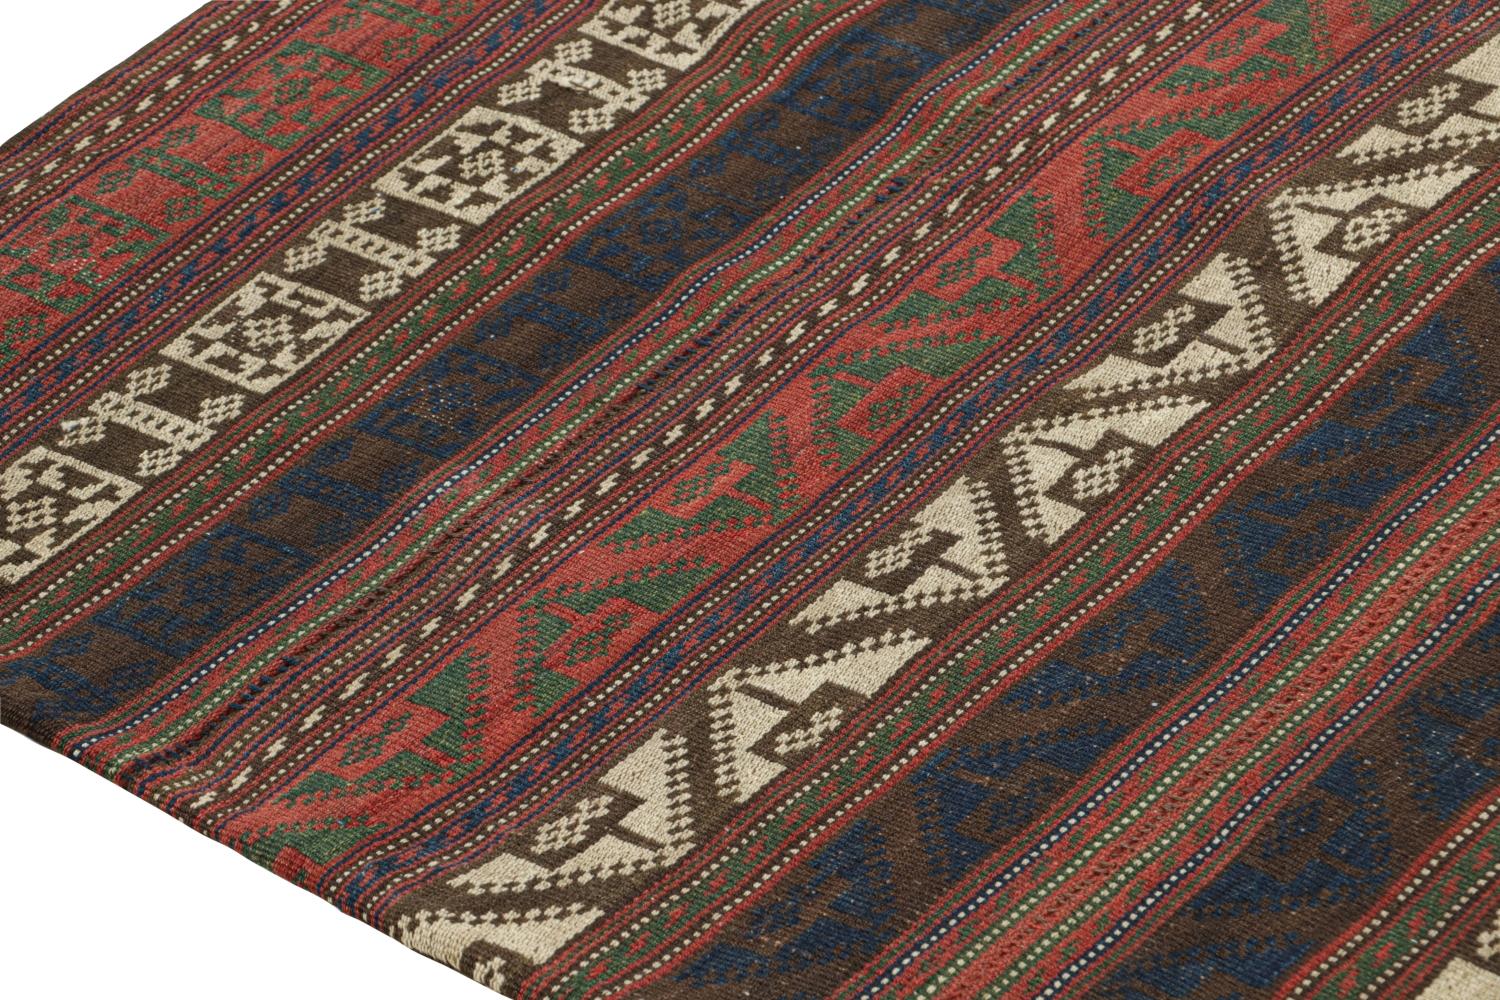 Vintage Kurdish Persian Kilim in Stripes & Geometric Patterns In Good Condition For Sale In Long Island City, NY